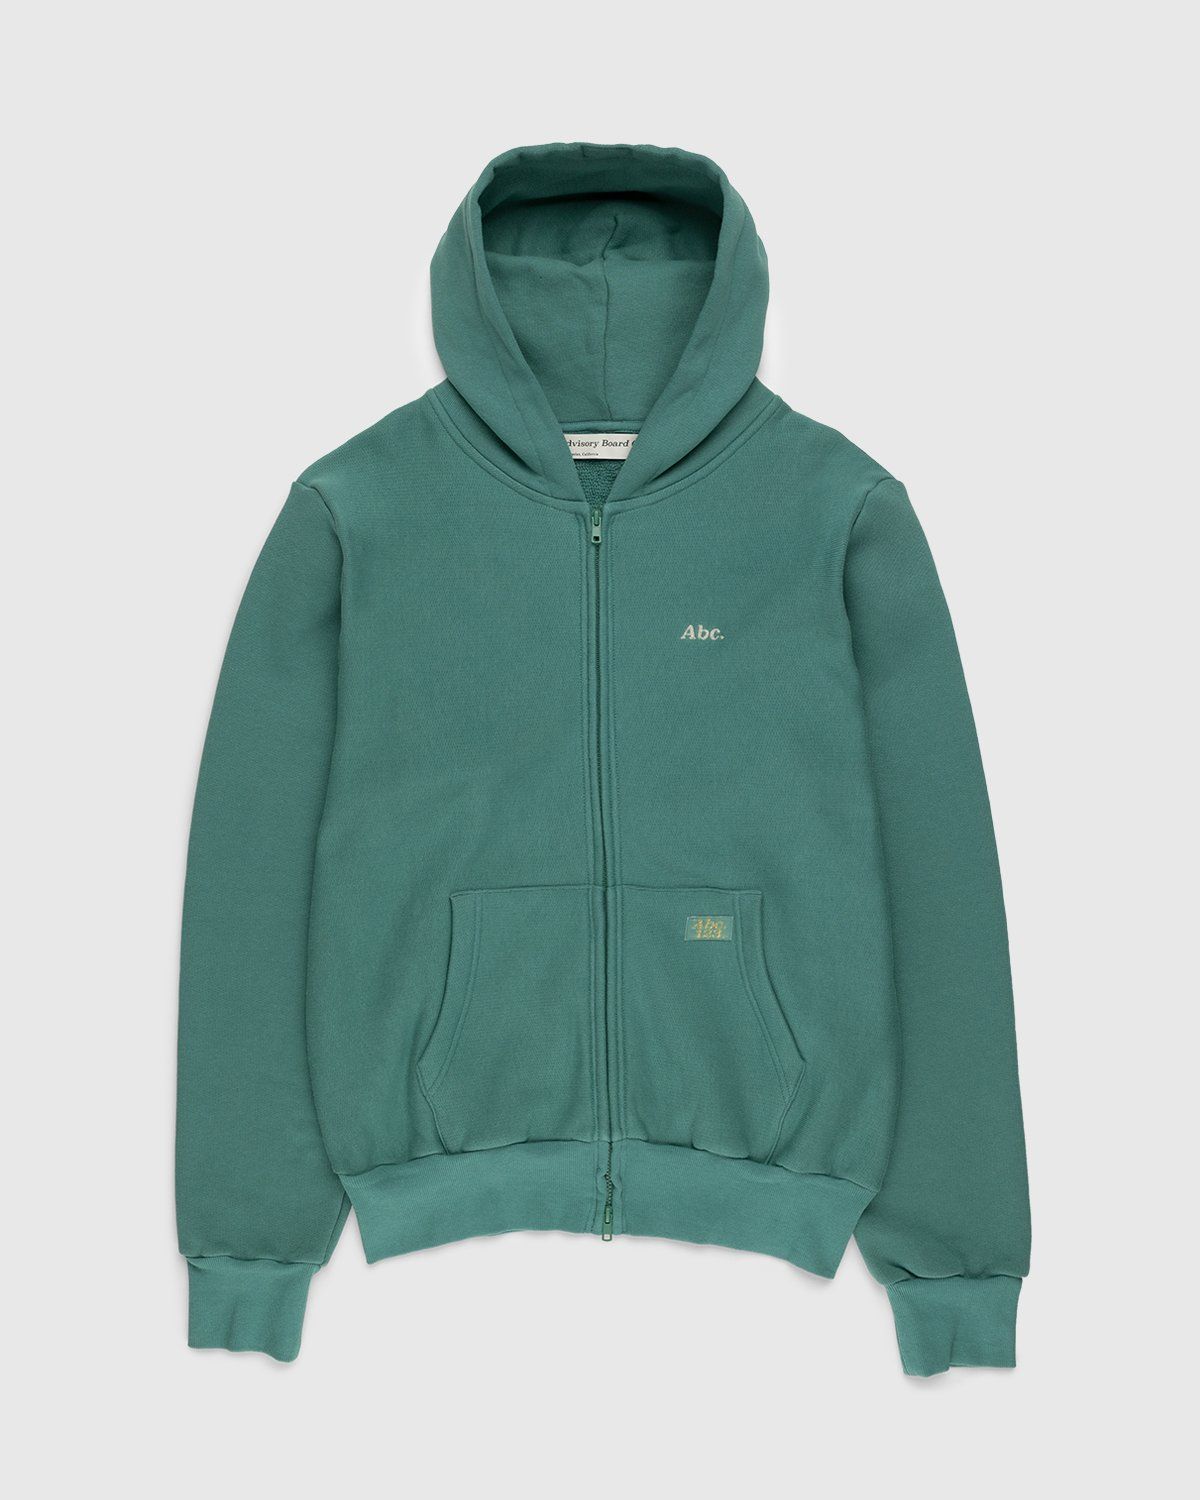 Abc. – Zip-Up French Terry Hoodie Apatite - Sweats - Green - Image 1